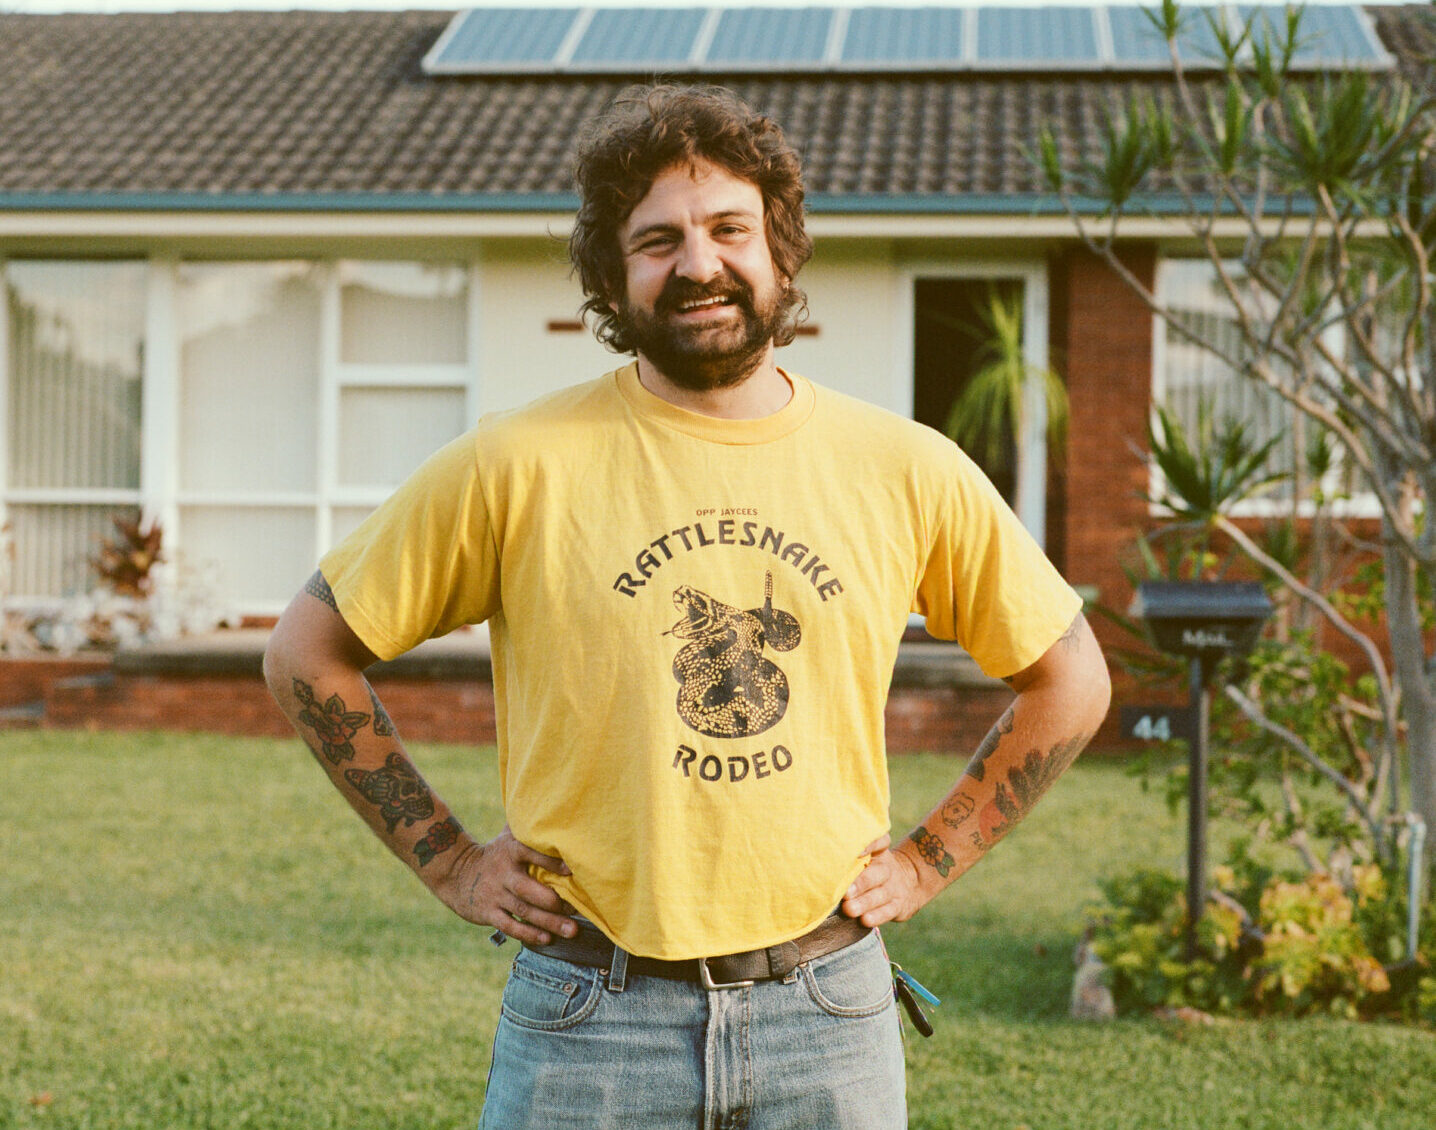 A man with brown hair and a full beard, wearing a yellow t-shirt and standing with his hands on his hips